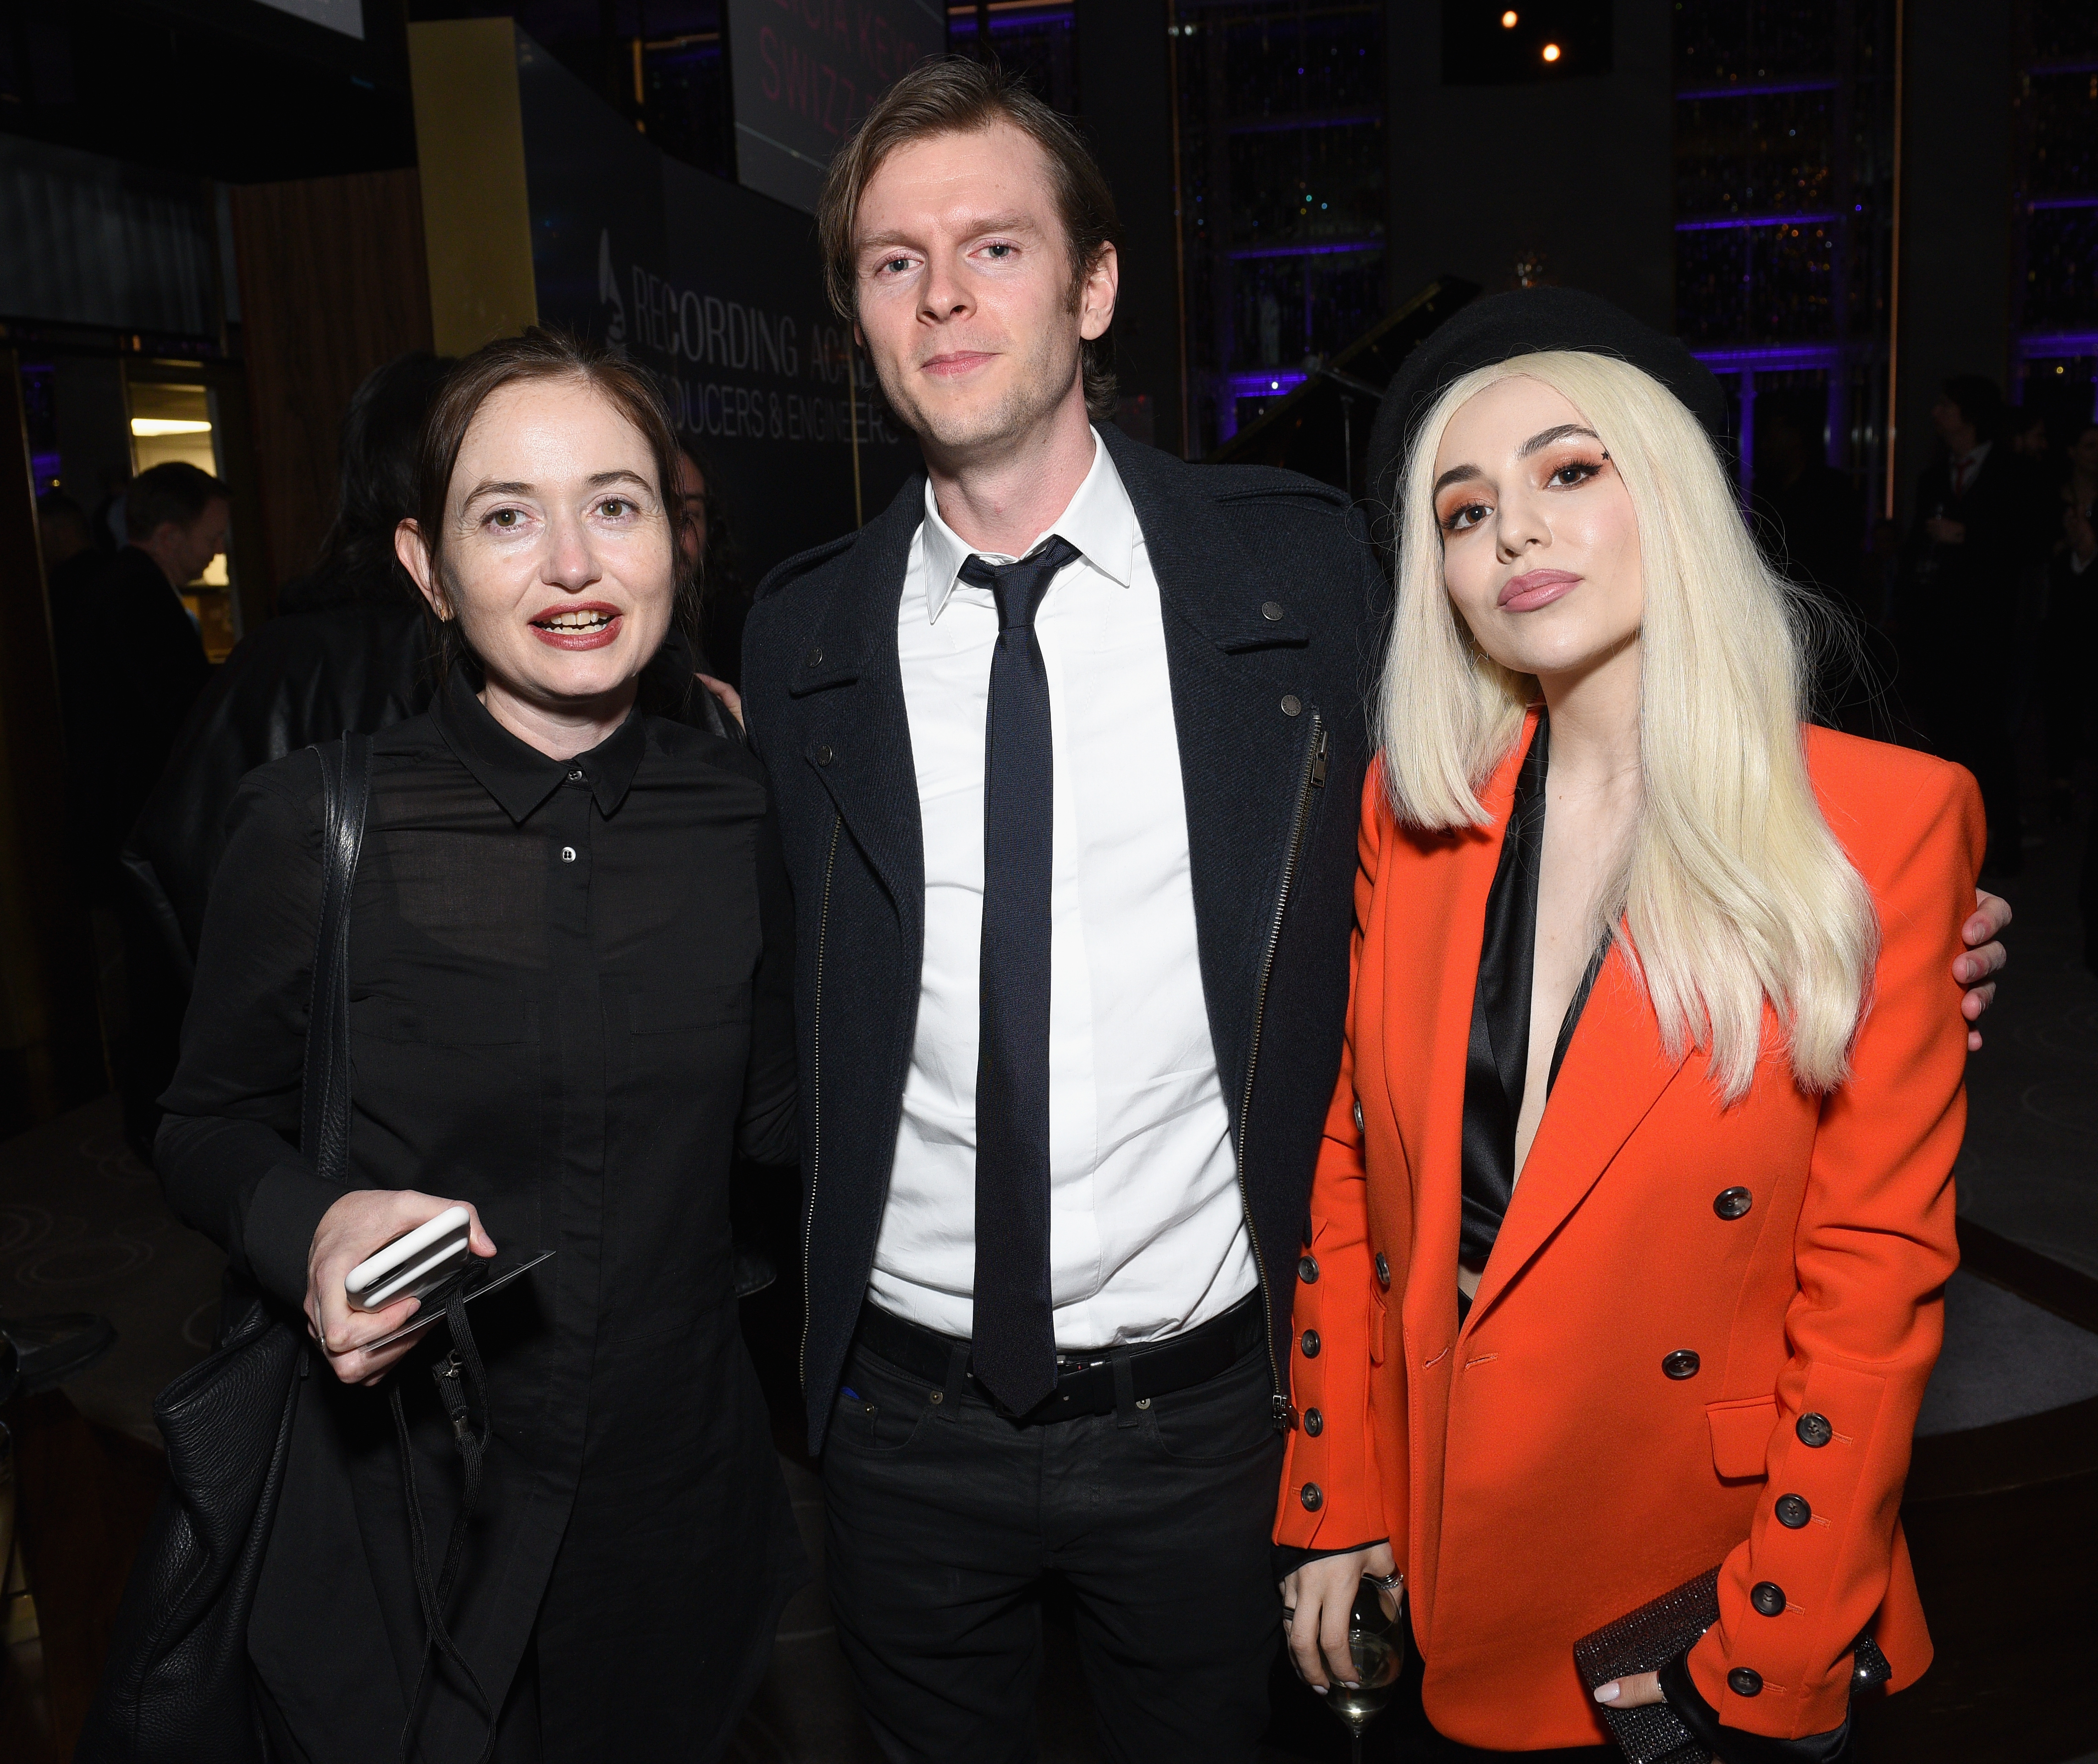 Henry "Cirkut" Walter and Ava Max attend the Producers and Engineers Wing 11th Annual Grammy Week Event Honoring Swizz Beatz And Alicia Keys at The Rainbow Room on January 25, 2018, in New York City. | Source: Getty Images